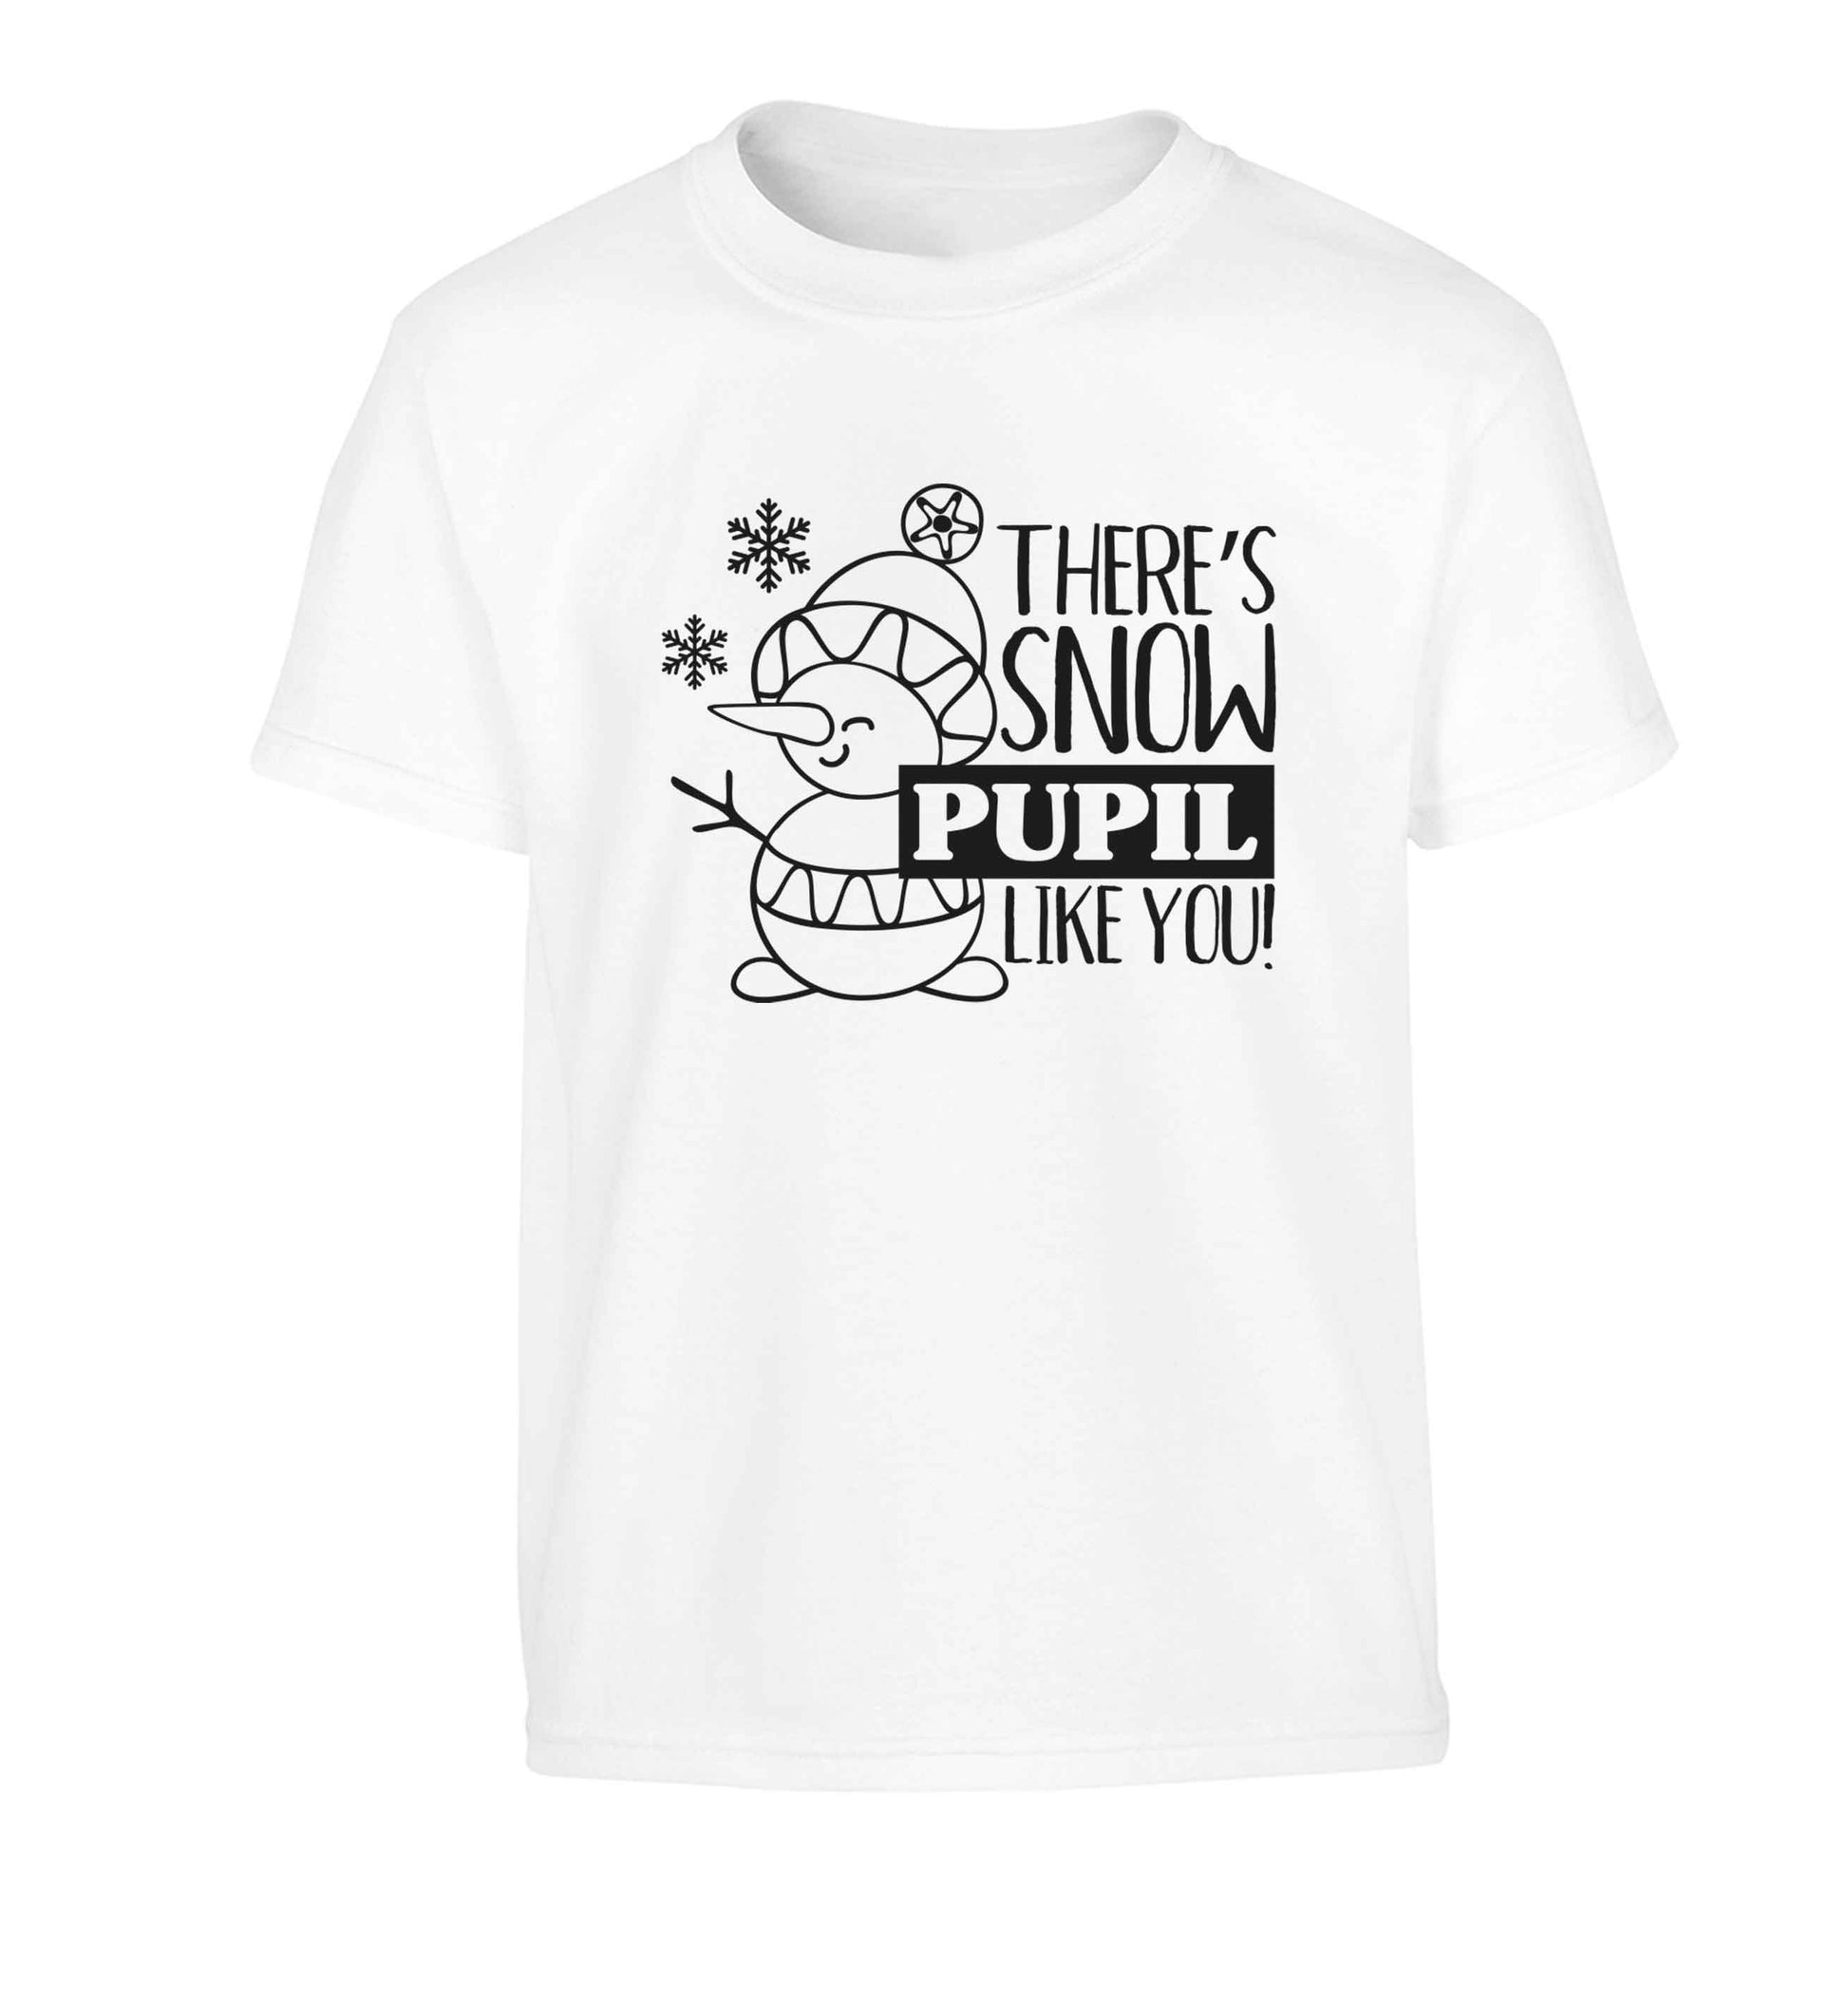 There's snow pupil like you Children's white Tshirt 12-13 Years